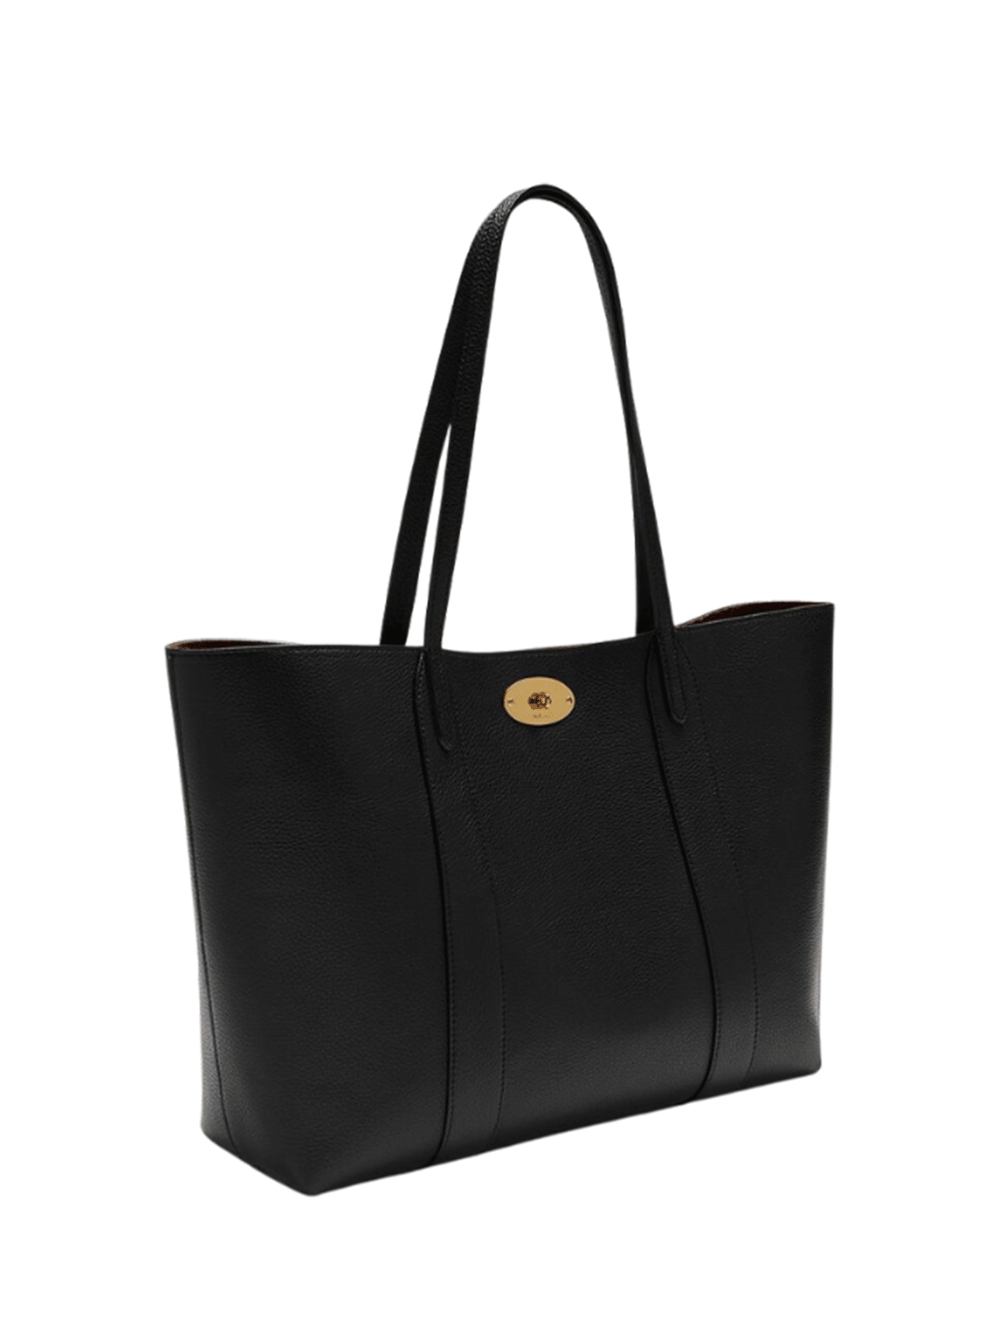 Mulberry-Bayswater-Tote-Small-Classic-Grain-Black-3